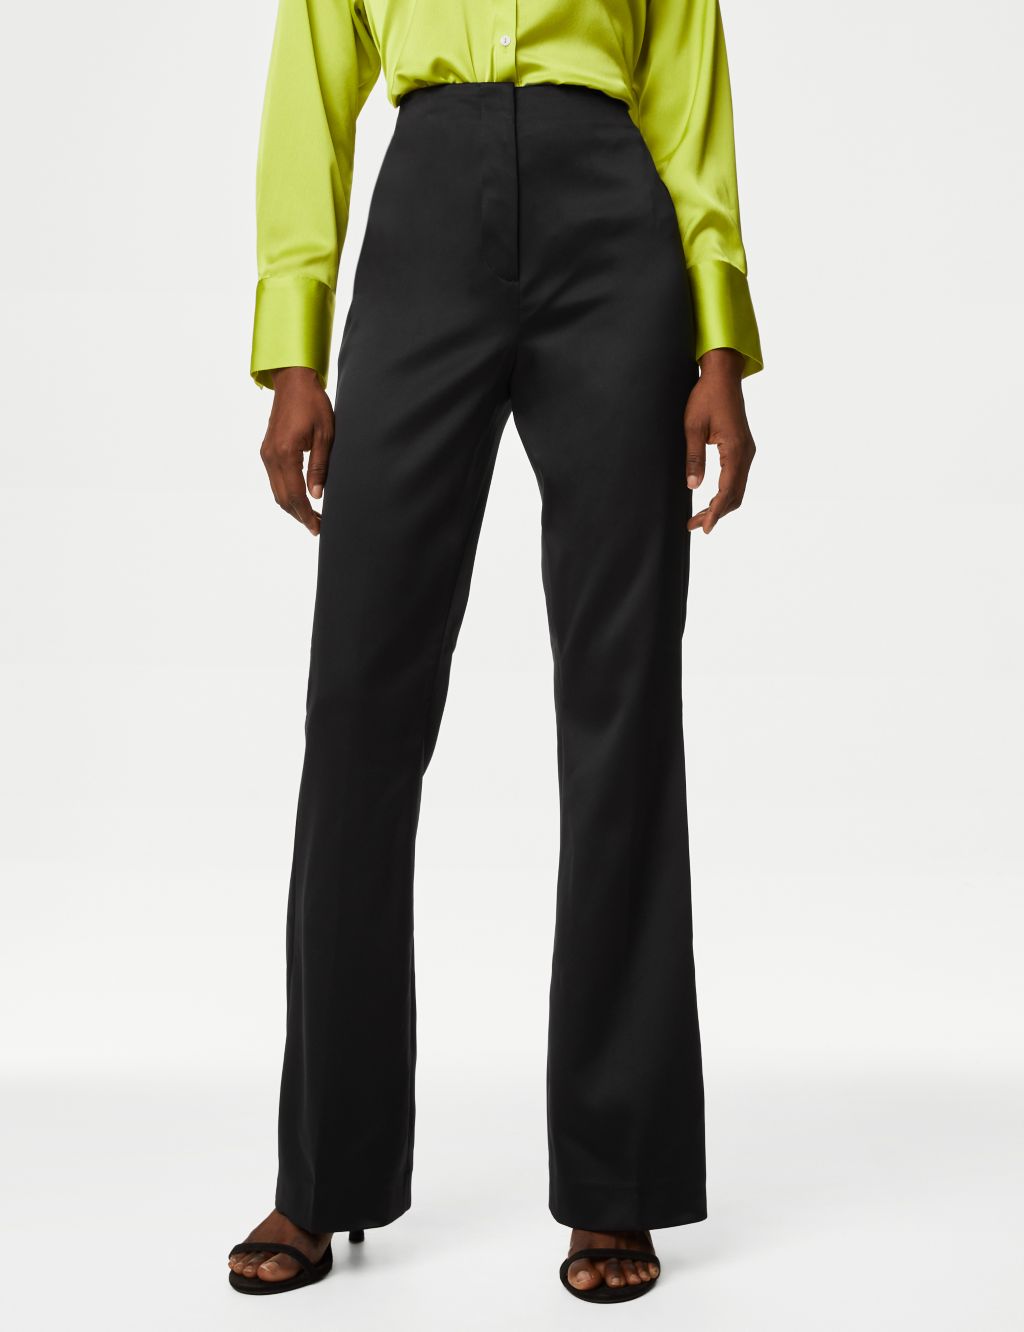 Satin Slim Fit Flare Trousers image 3